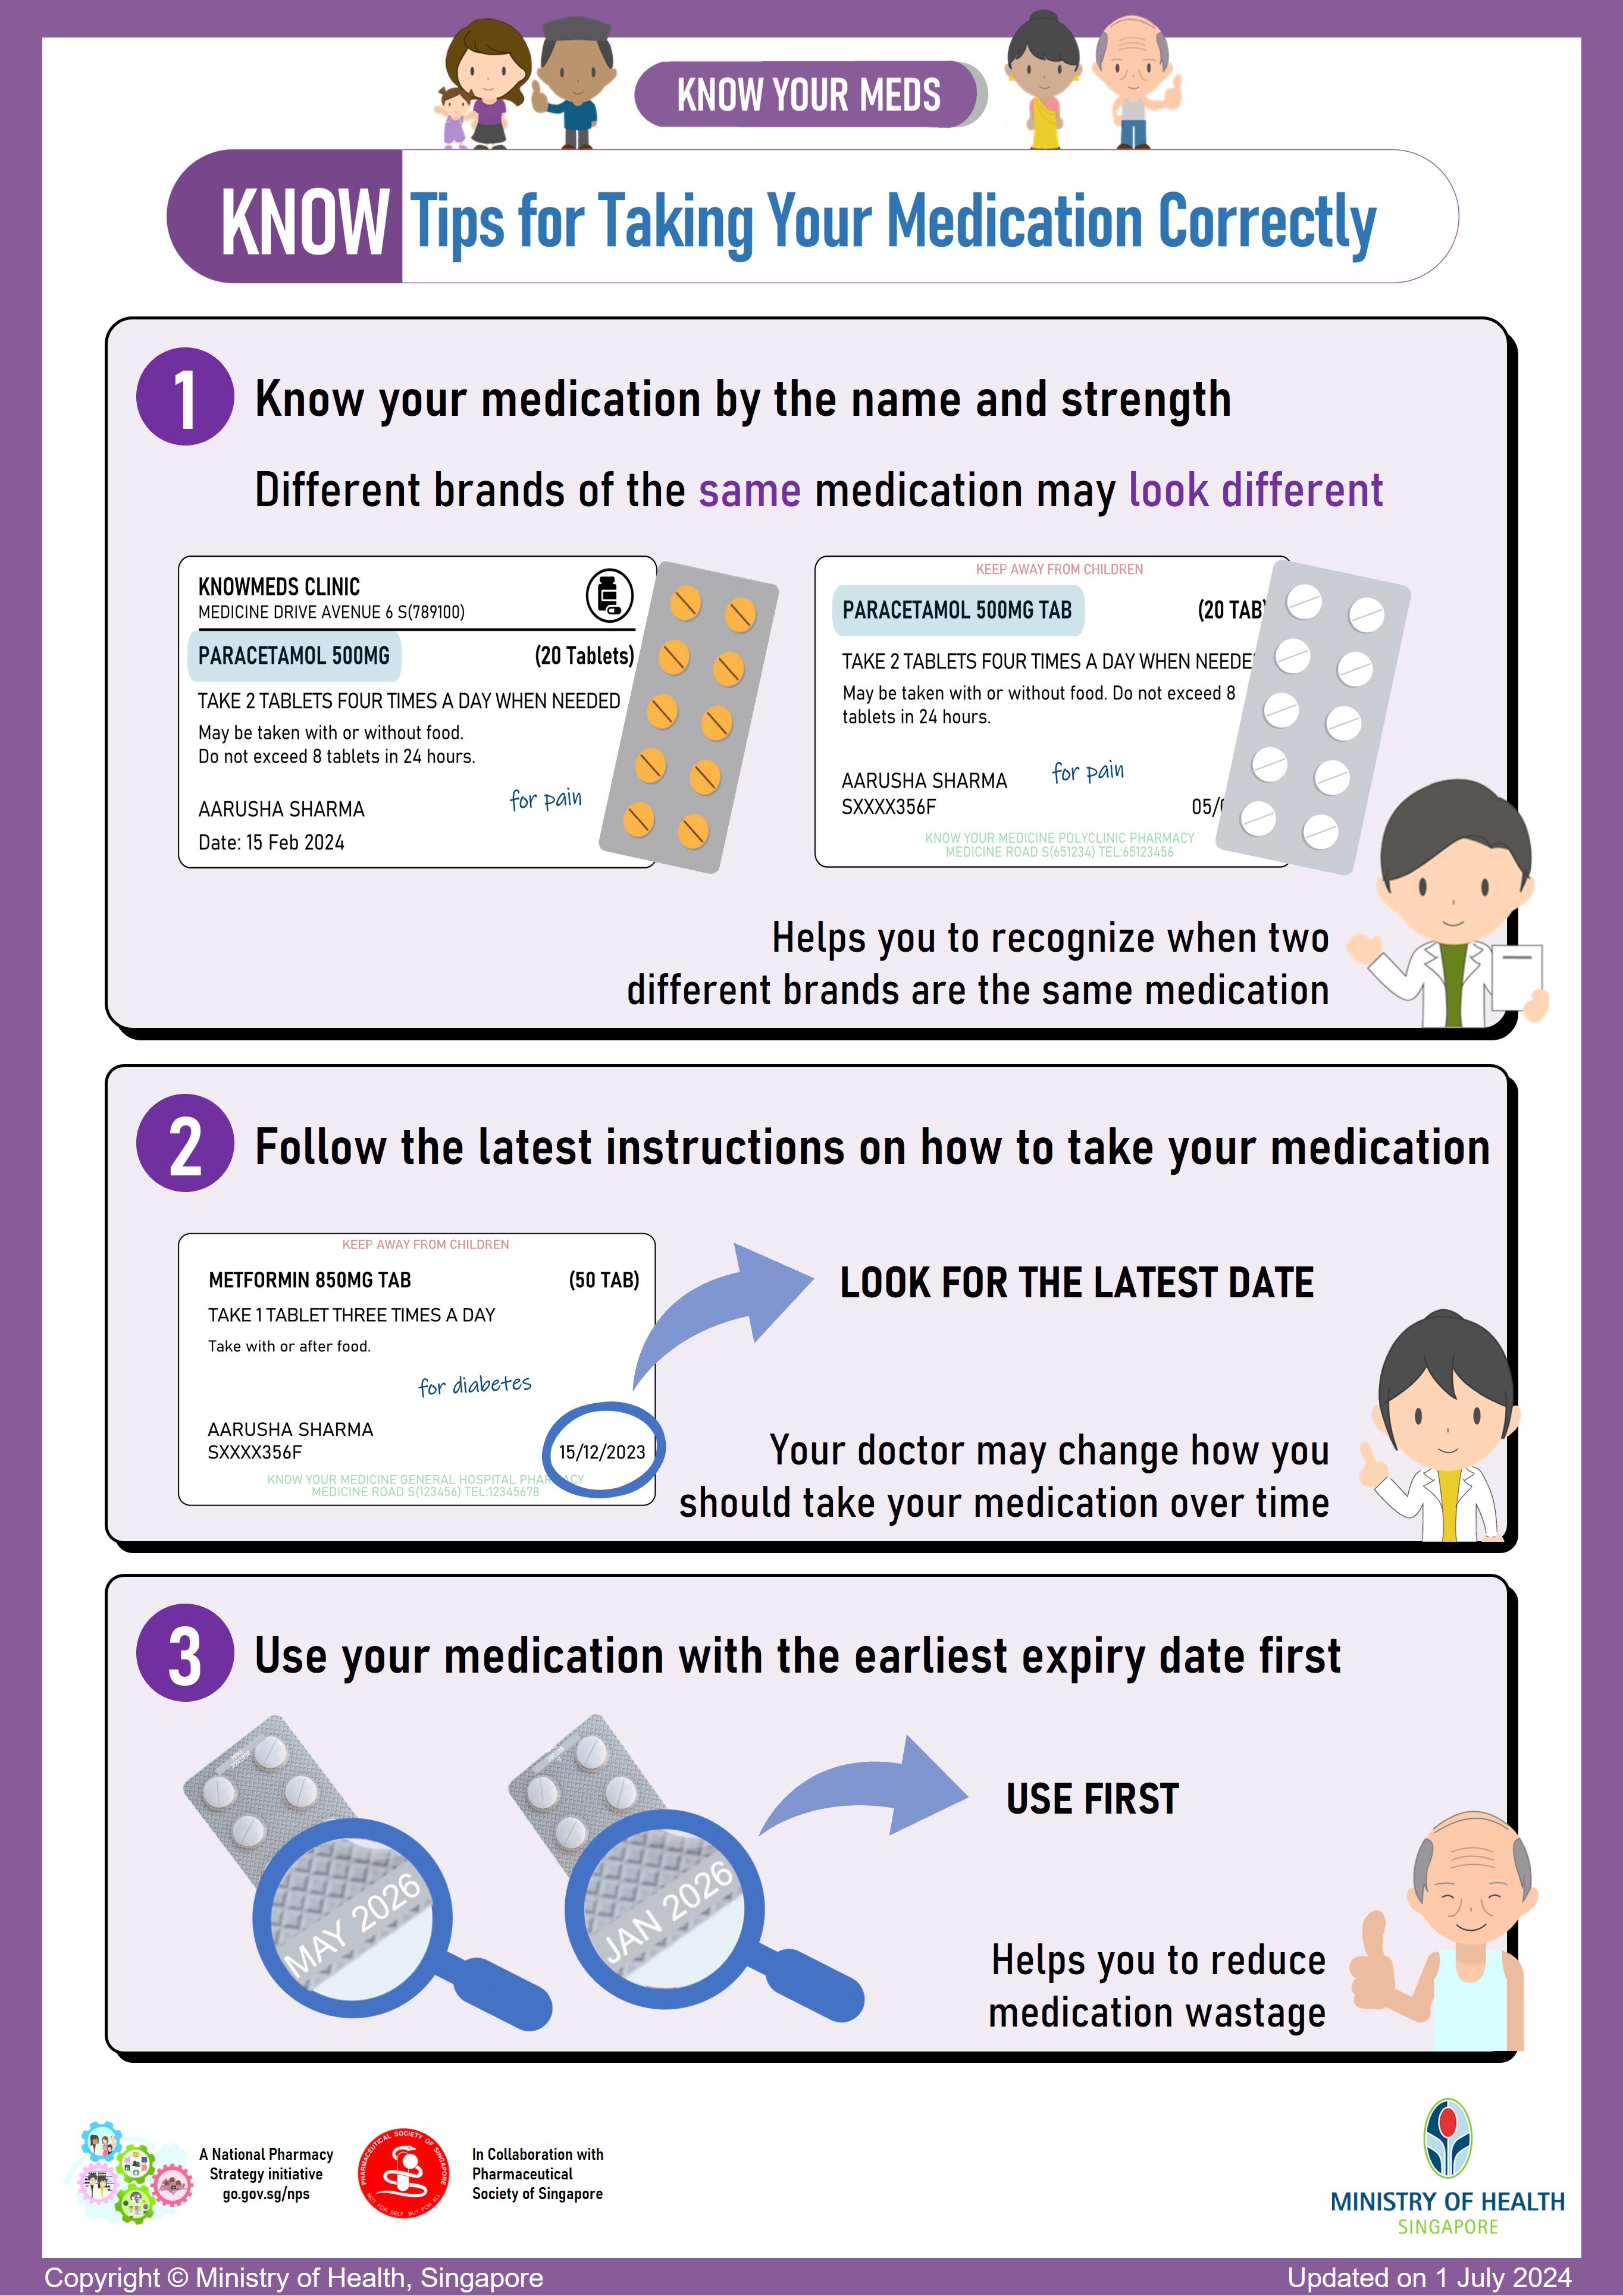 Know Tips for Taking Your Medication Correctly